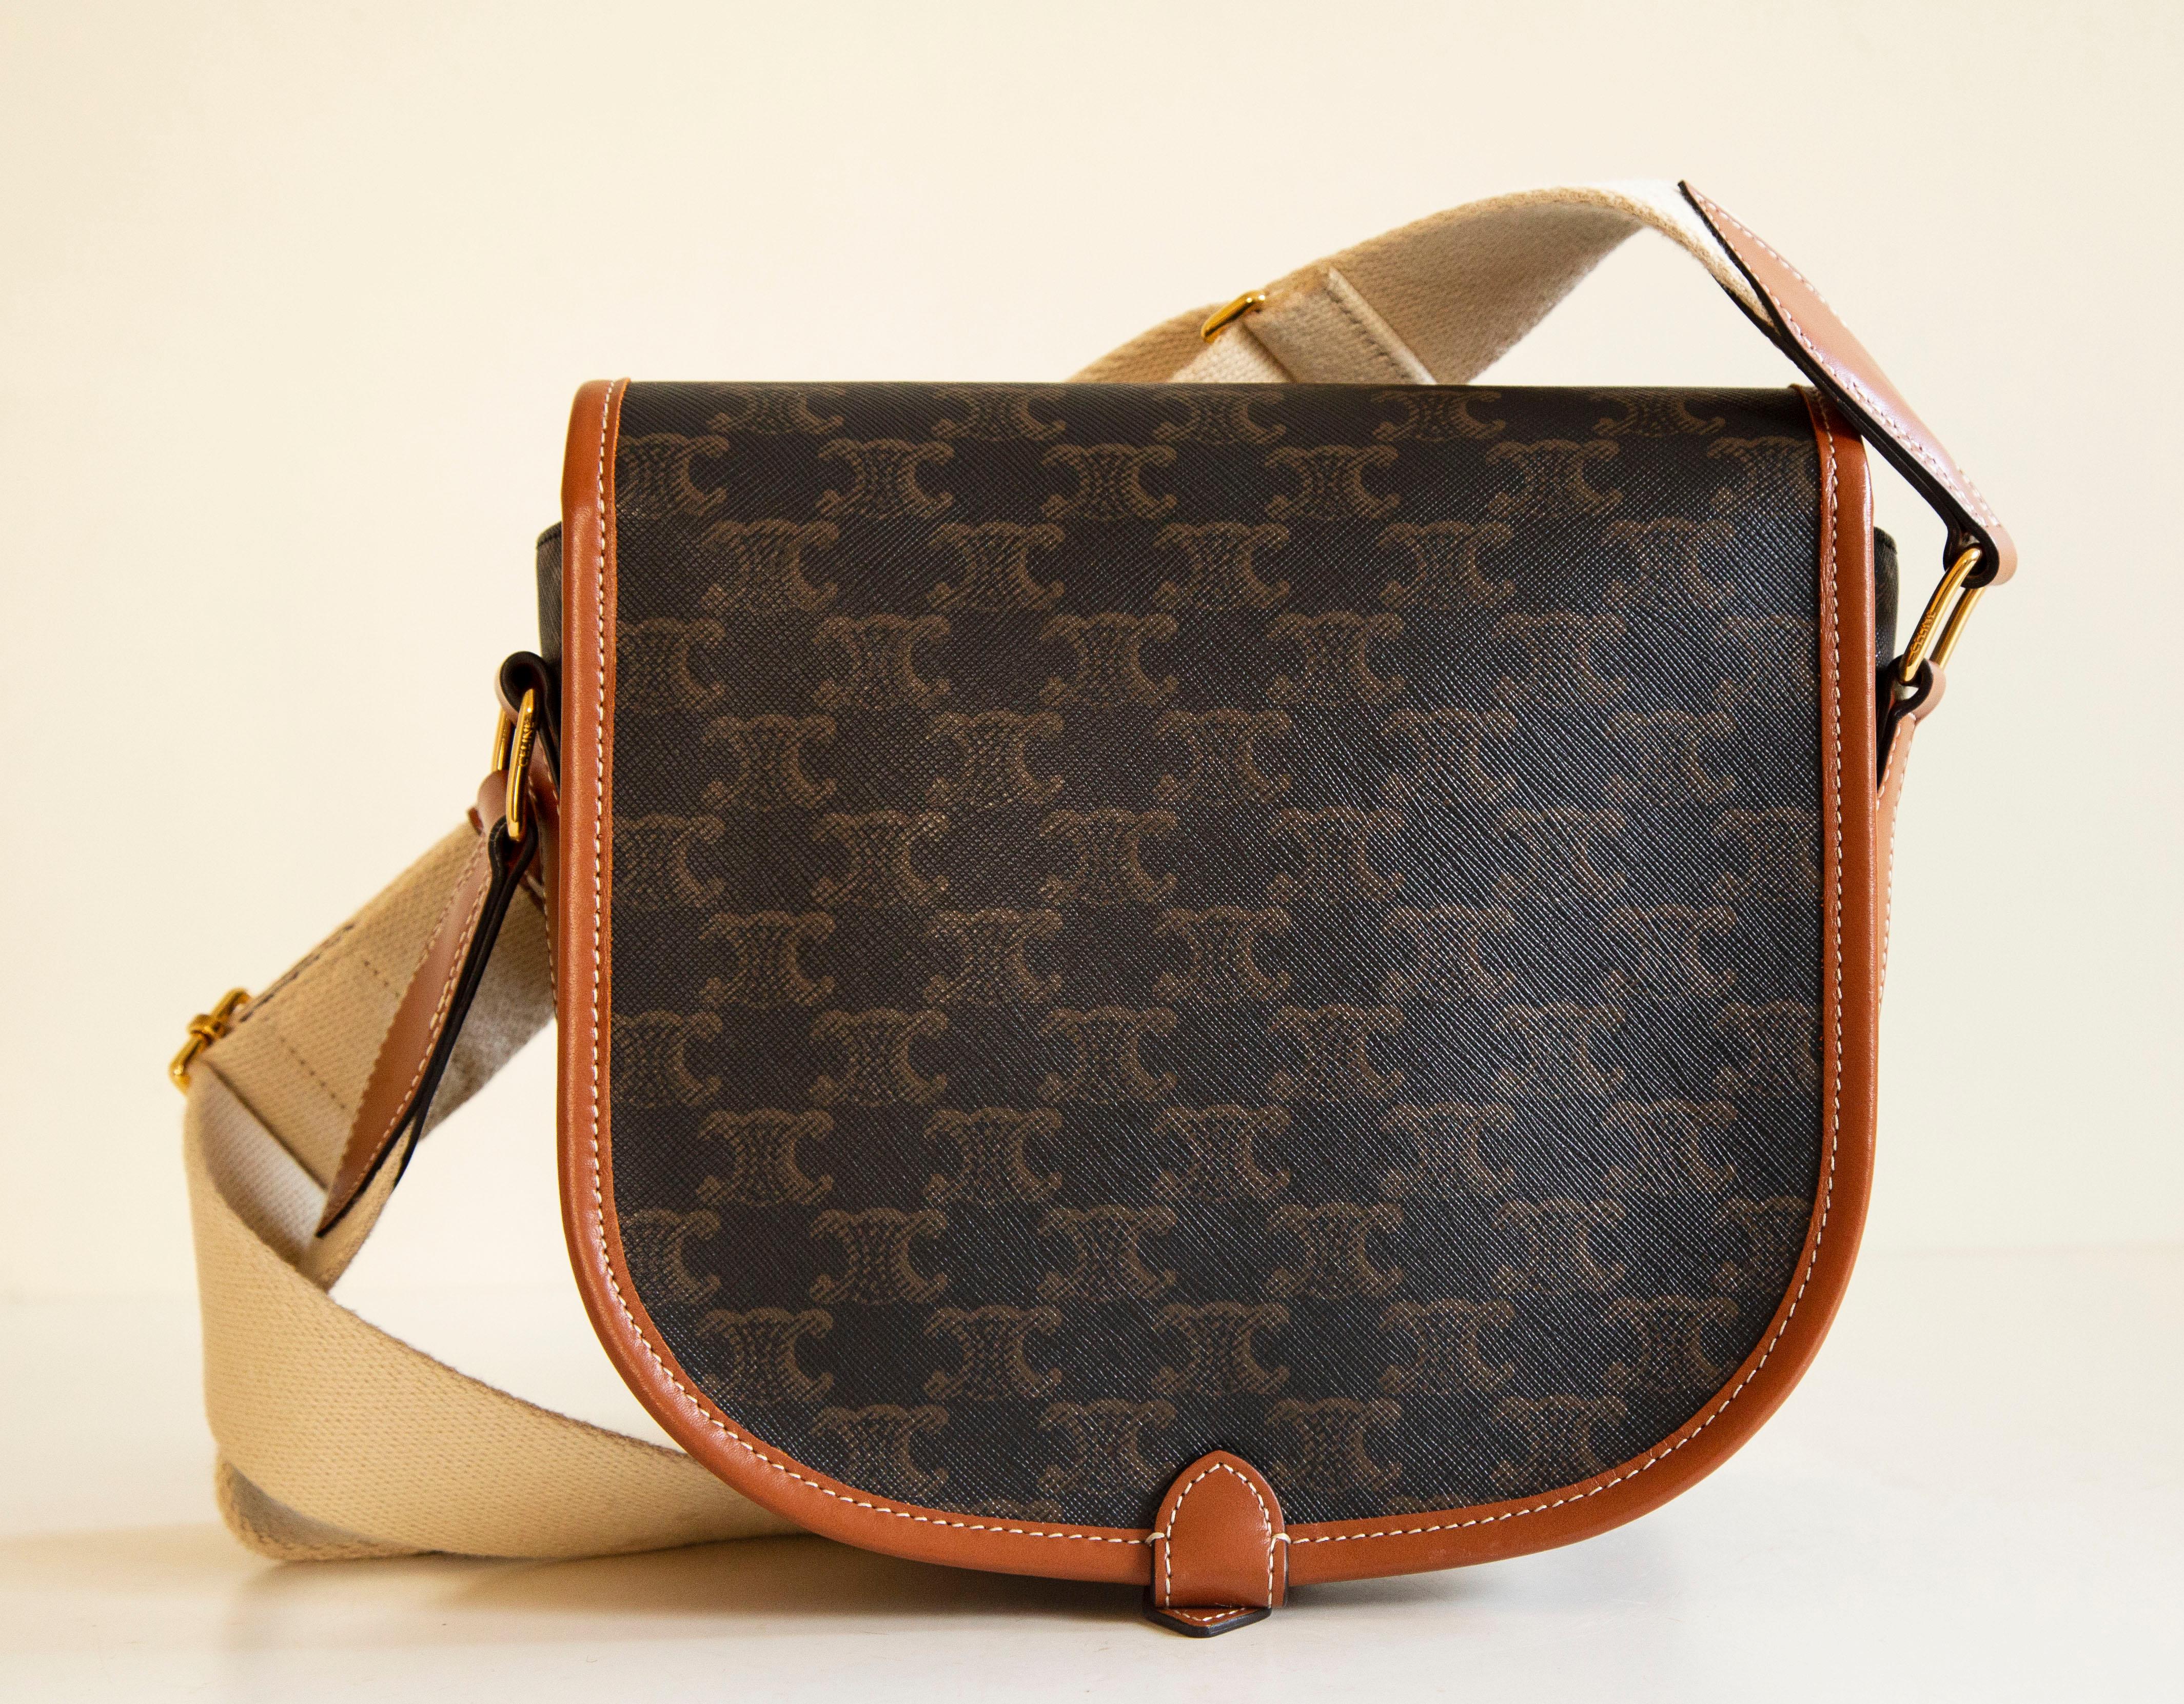 2020s Celine Large Folco Crossbody Bag in Triomphe Canvas and Calfskin In Excellent Condition For Sale In Arnhem, NL